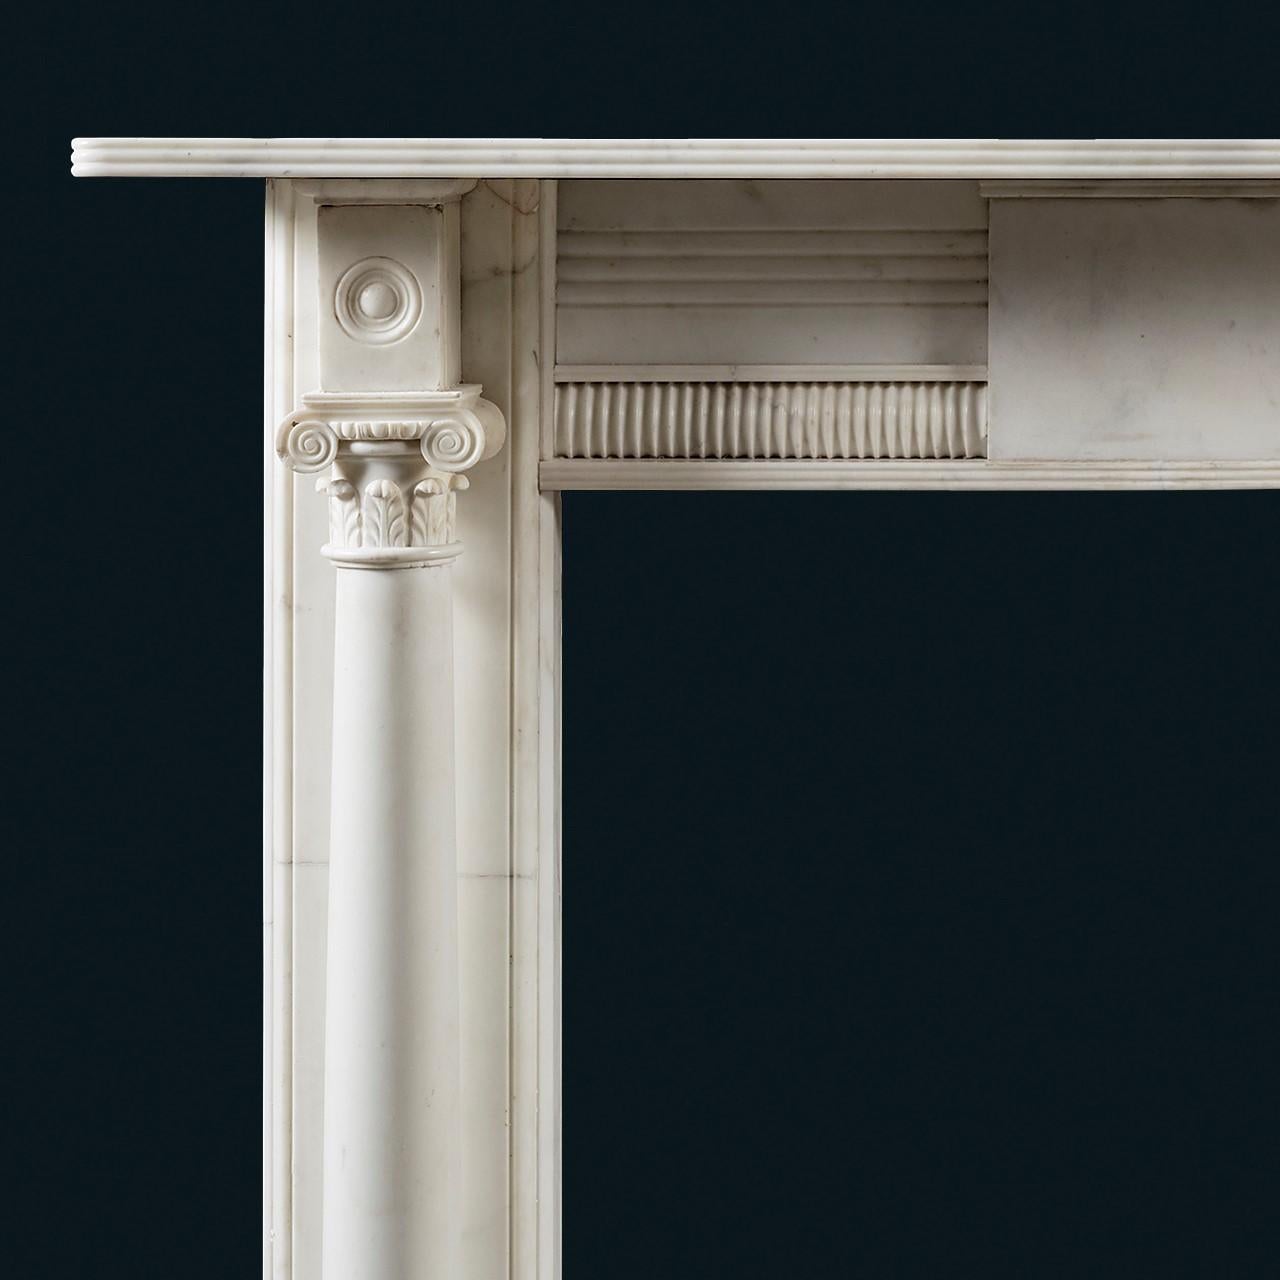 A Regency period statuary marble column chimneypiece, the frieze and shelf enriched with reeds, centred with a plain central tablet, flanked by square corner blocks carved with bullseye roundels, above tapering columns capped by composite capitals,